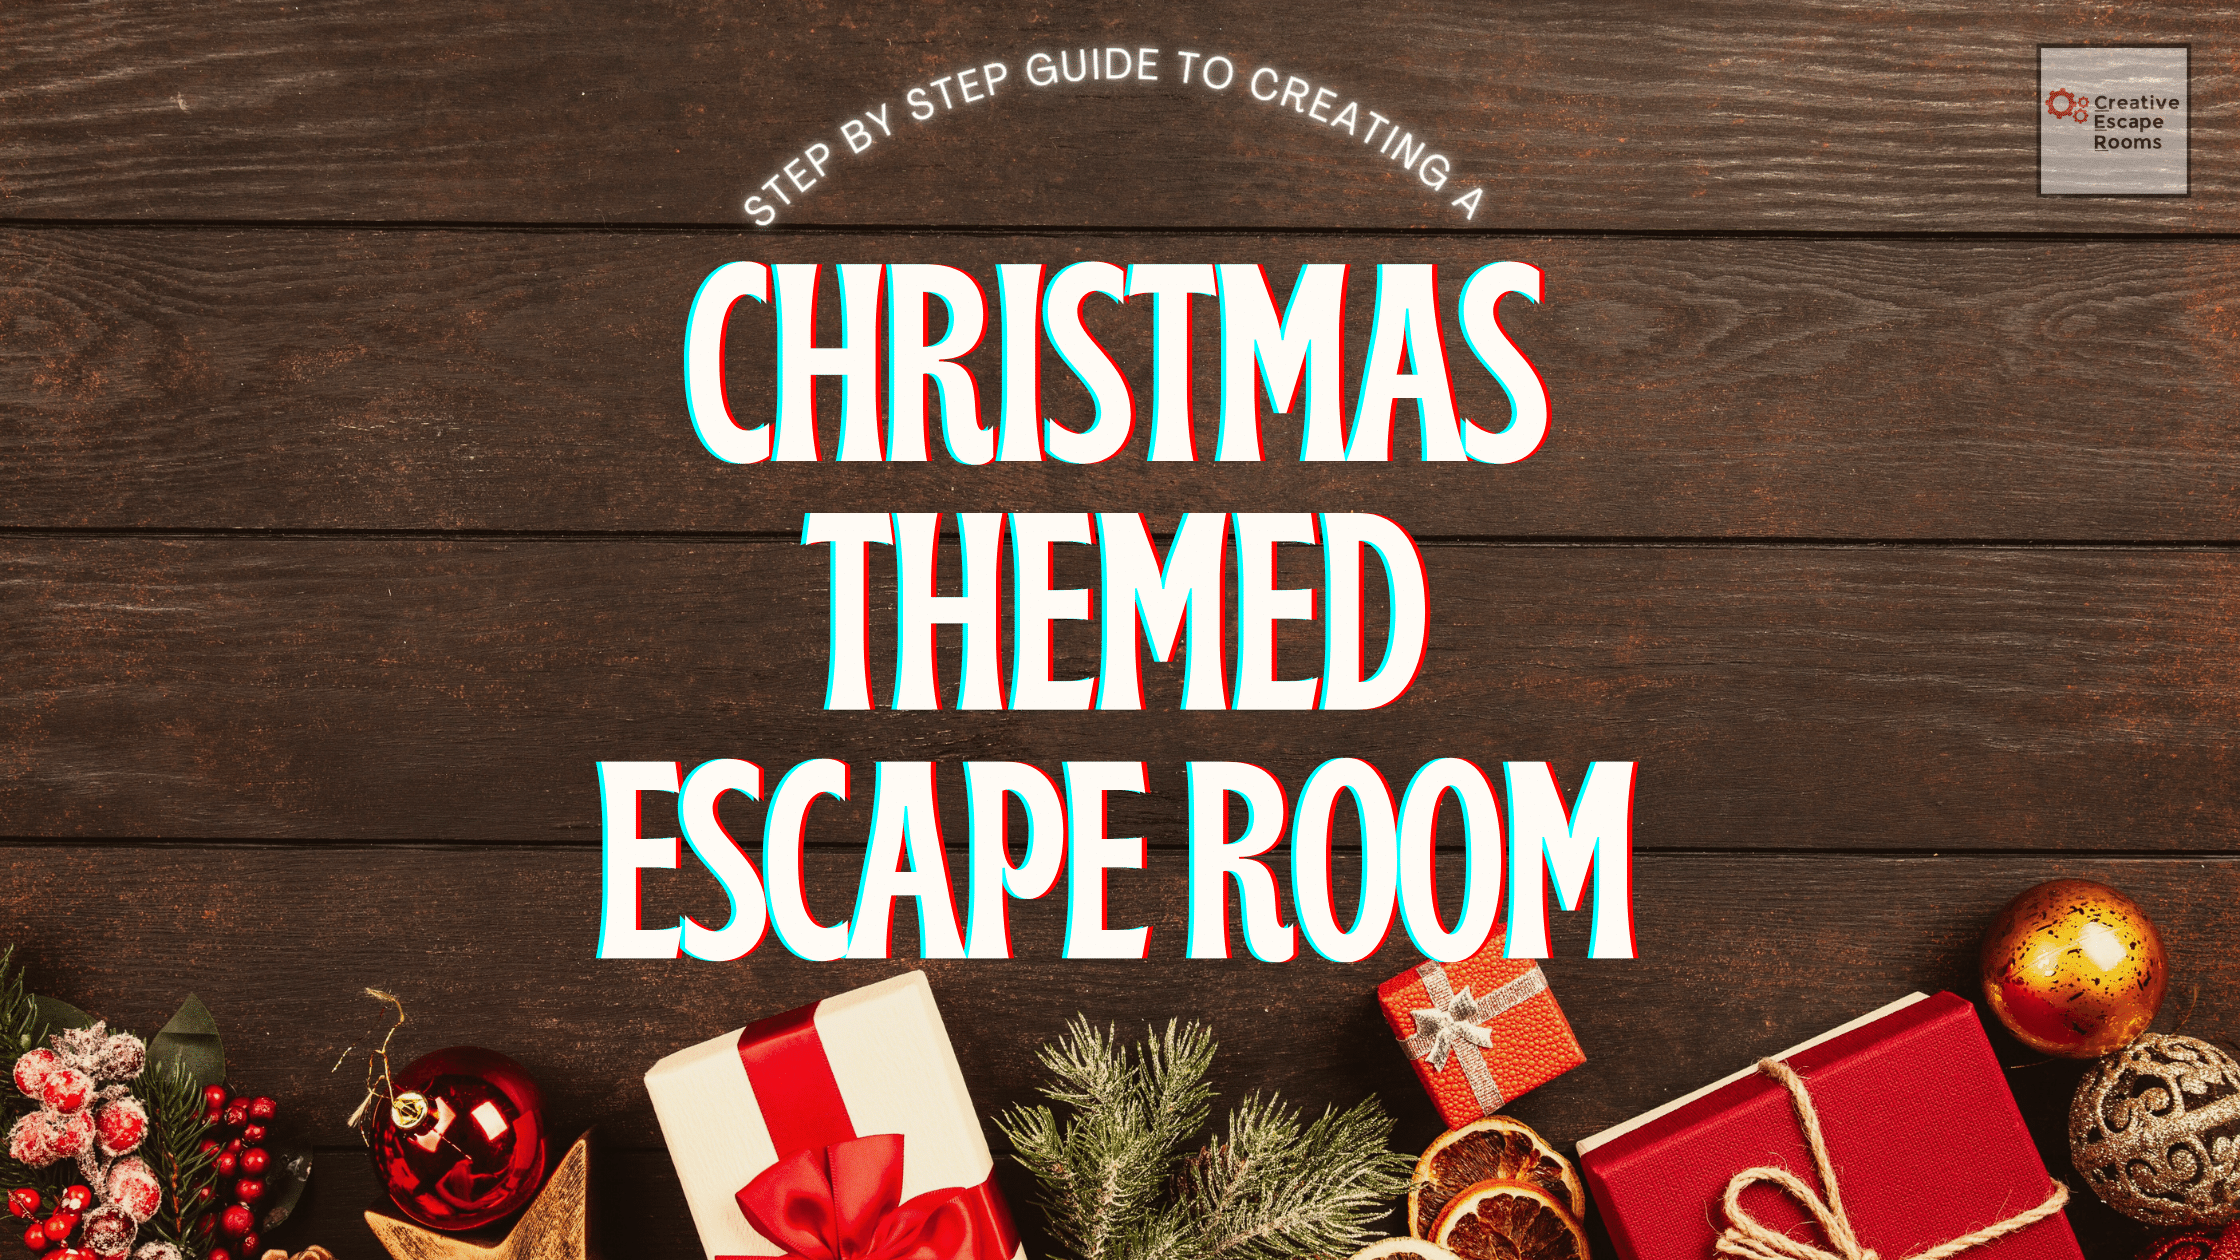 Crafting a Holiday Adventure: How to Create a Christmas-Themed Escape Room